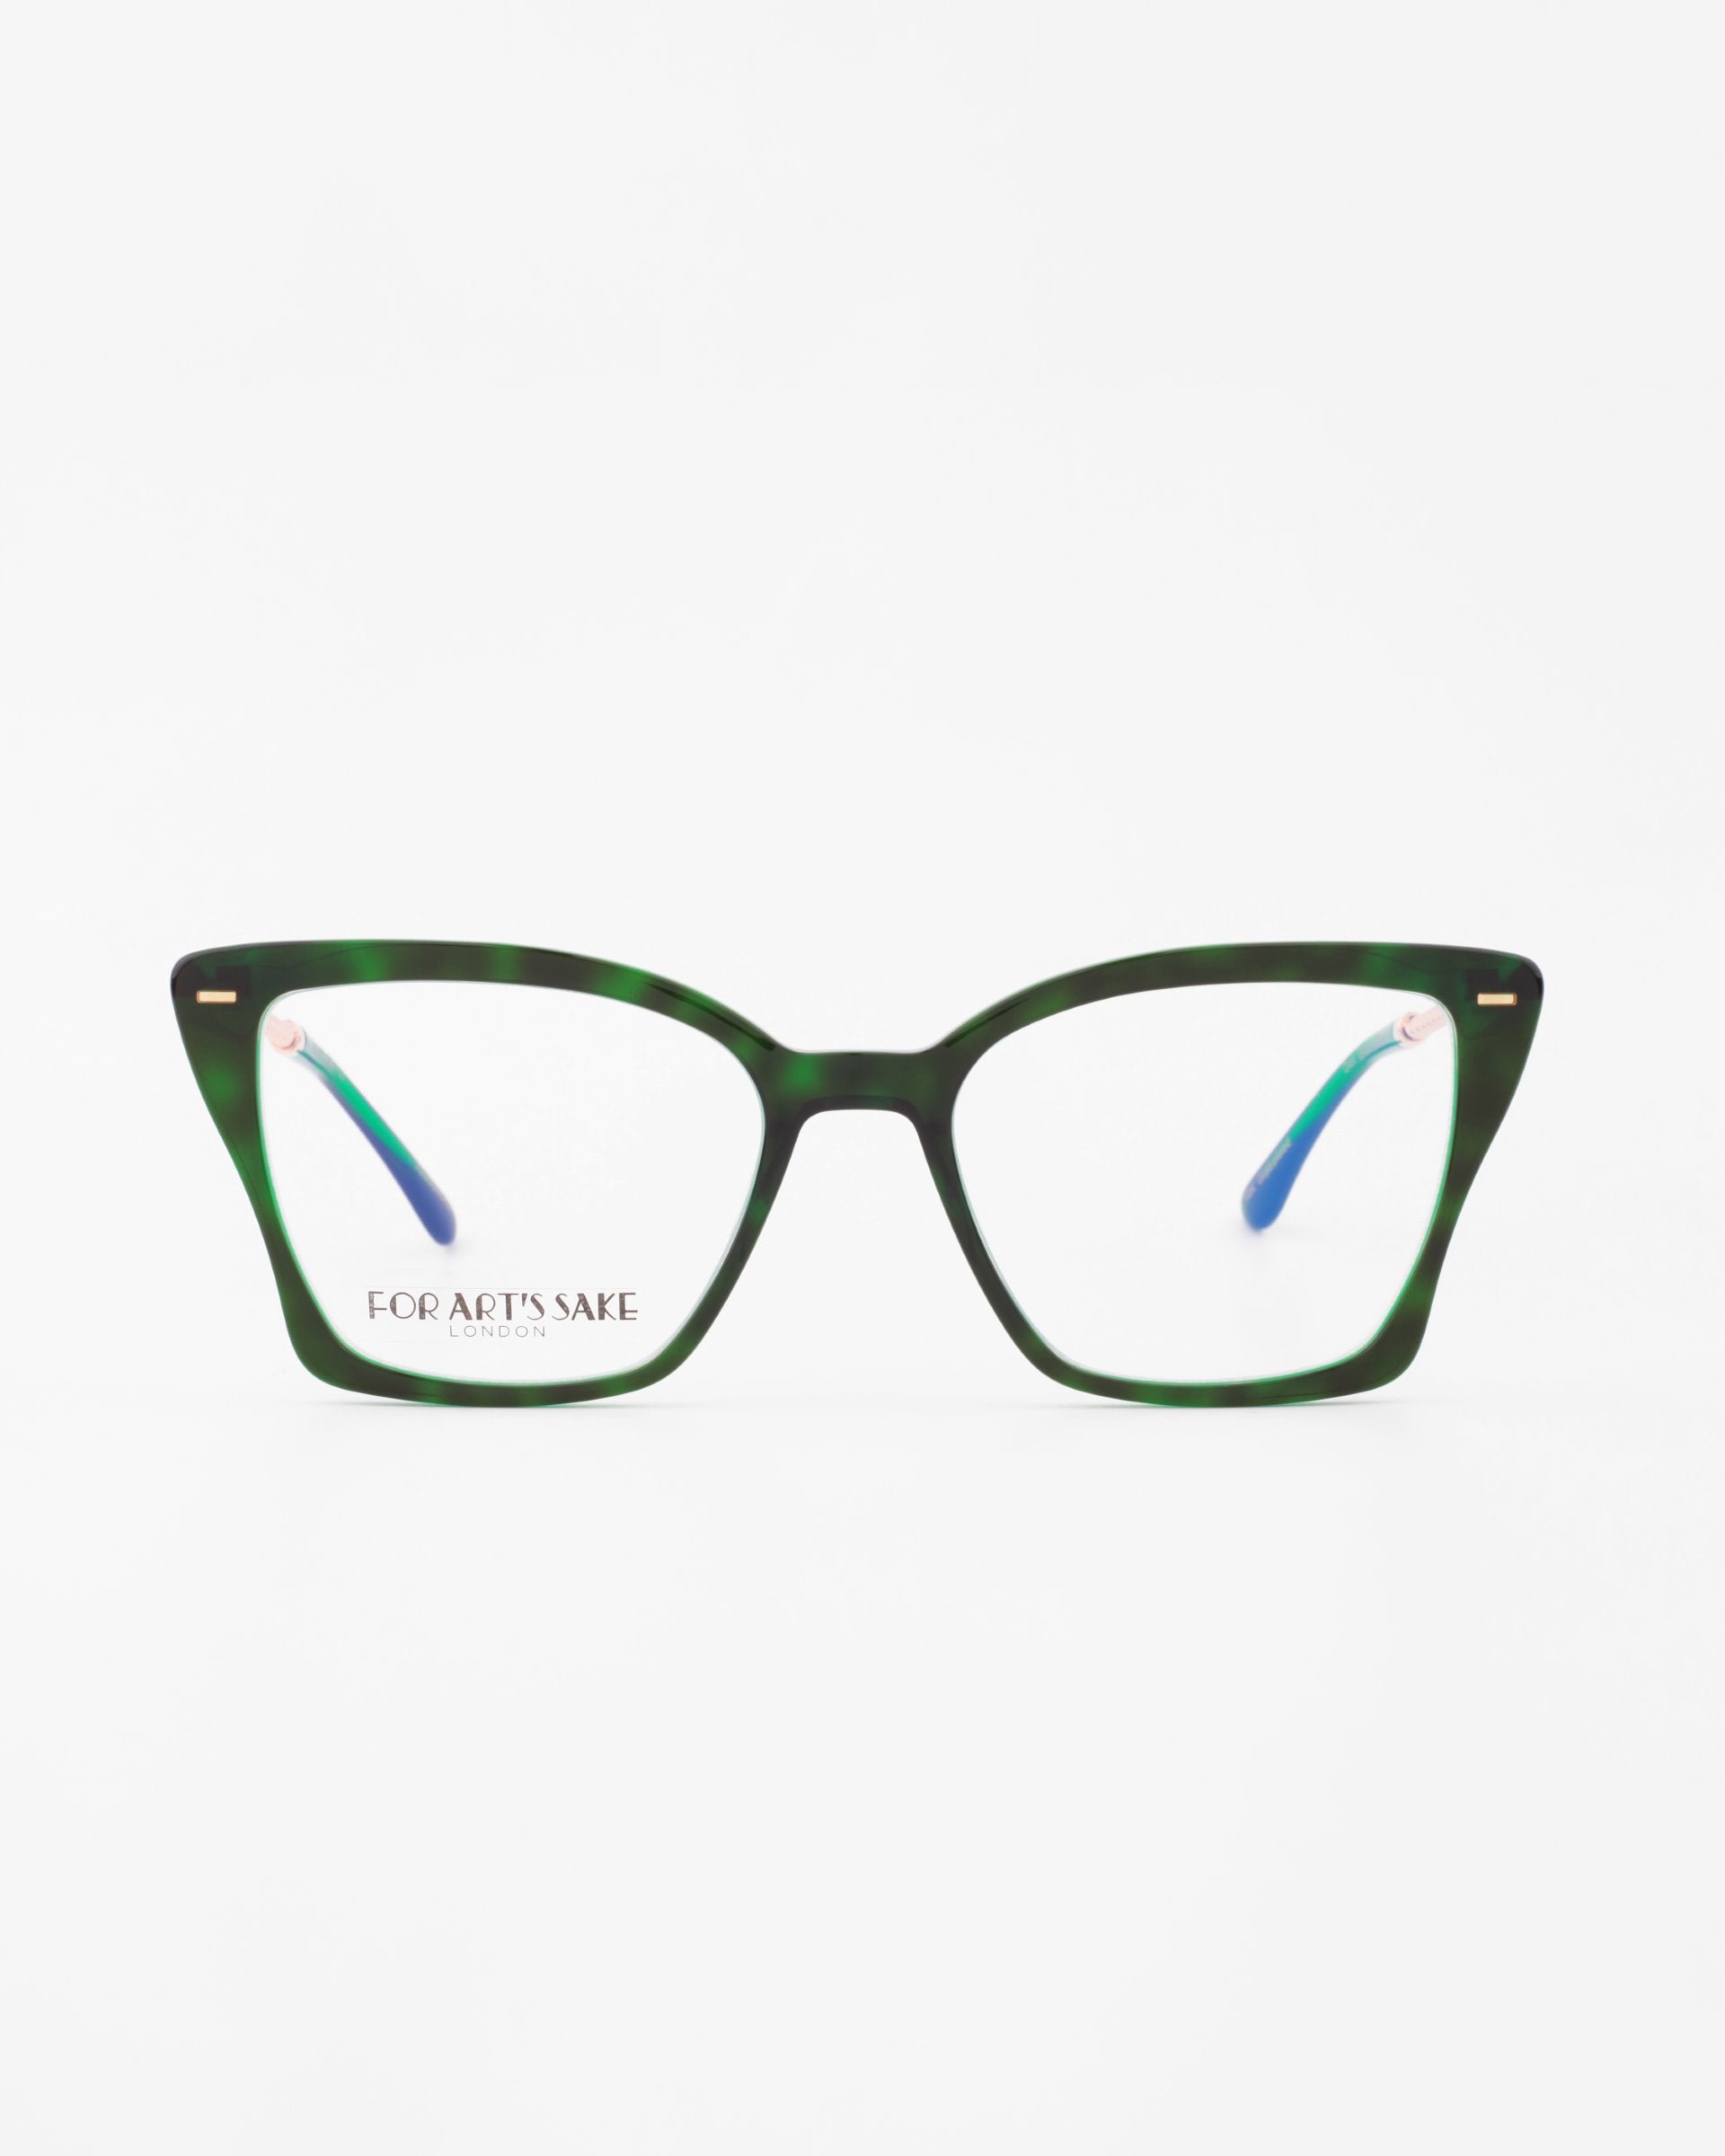 A pair of eyeglasses with dark green, horn-rimmed frames and rectangular lenses featuring blue light filter technology. The temples are blue with gold accents near the hinges, giving them an elegant touch. The brand "For Art's Sake®" is written on the left lens. The background is white.